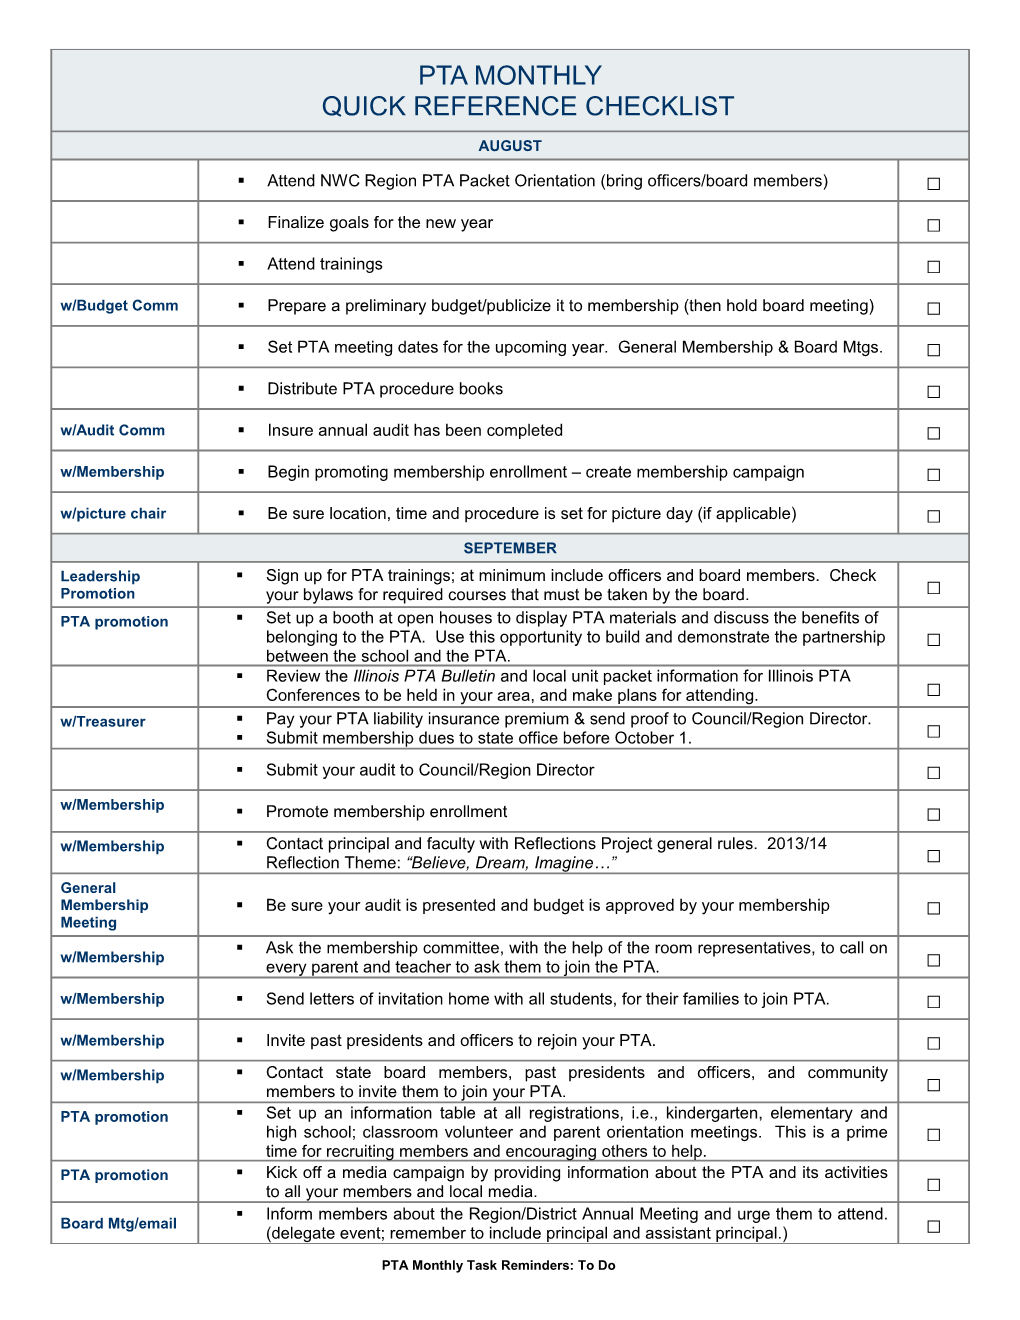 PTA Monthlyquick Reference Checklist